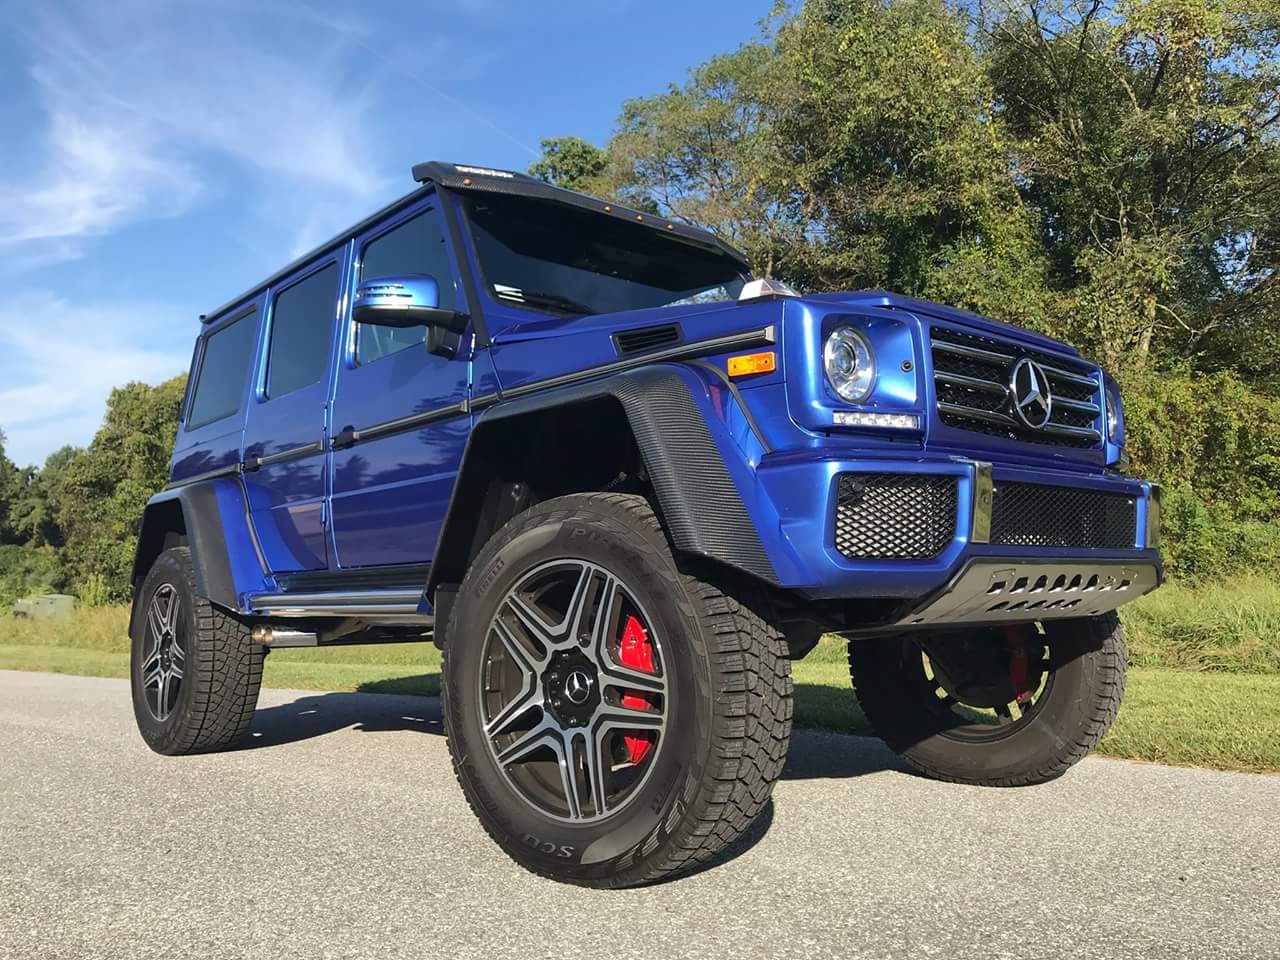 2018 Mercedes-Benz G550 - 2018 G550 4x4 Squared - Used - VIN WDCYC5FH7JX292057 - 547 Miles - 8 cyl - 4WD - Automatic - Wagon - Blue - Alexandria, VA 22315, United States